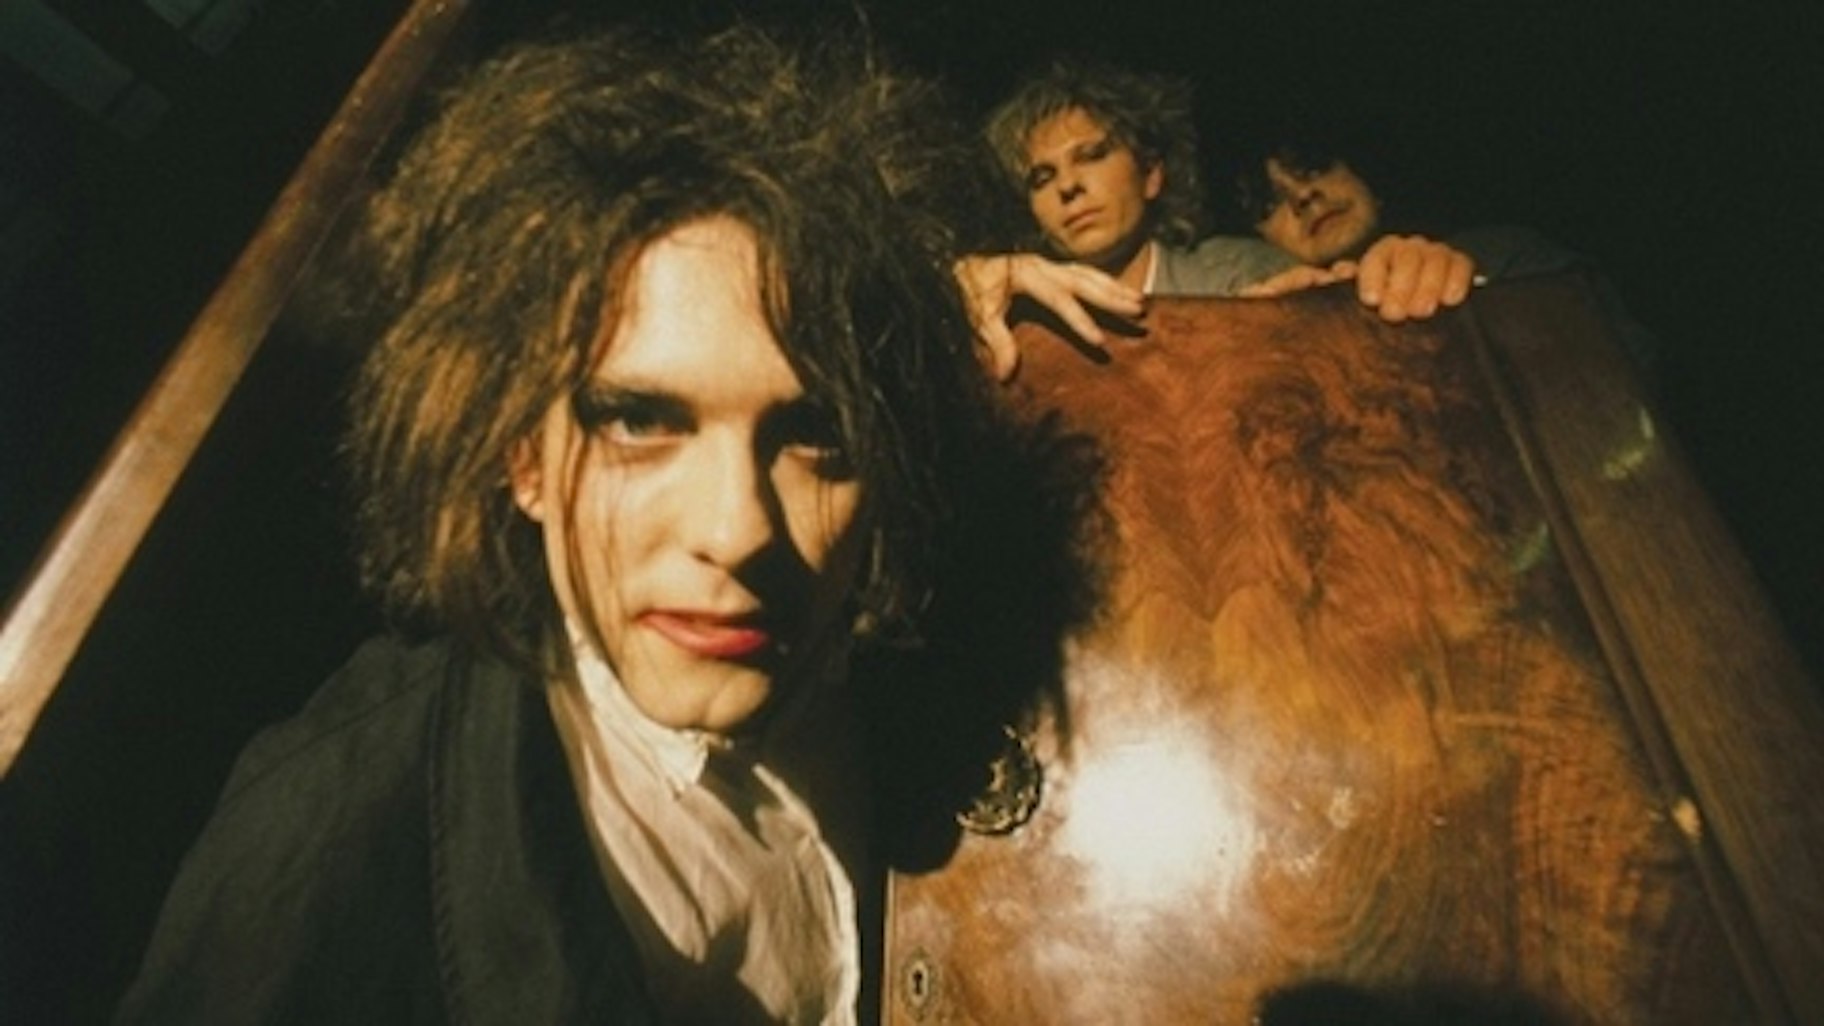 The Cure "Close to Me" -